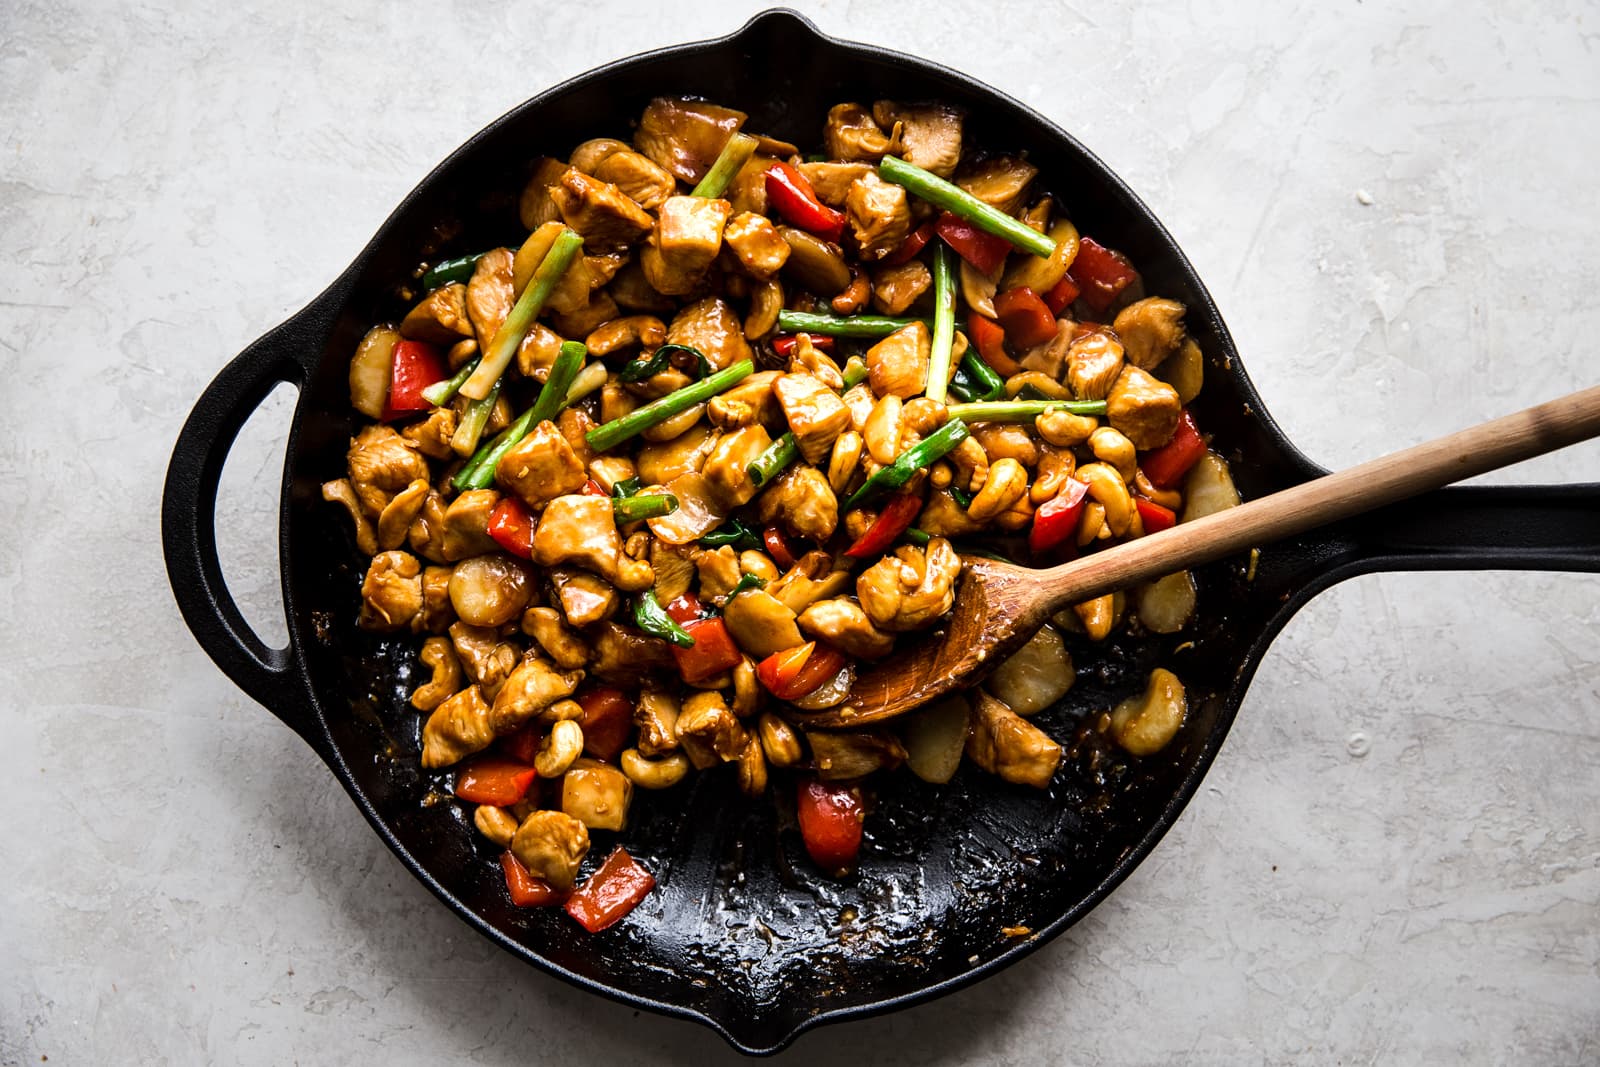 homemade cashew chicken recipe in a skillet with red bell peppers, green onions and water chestnuts.